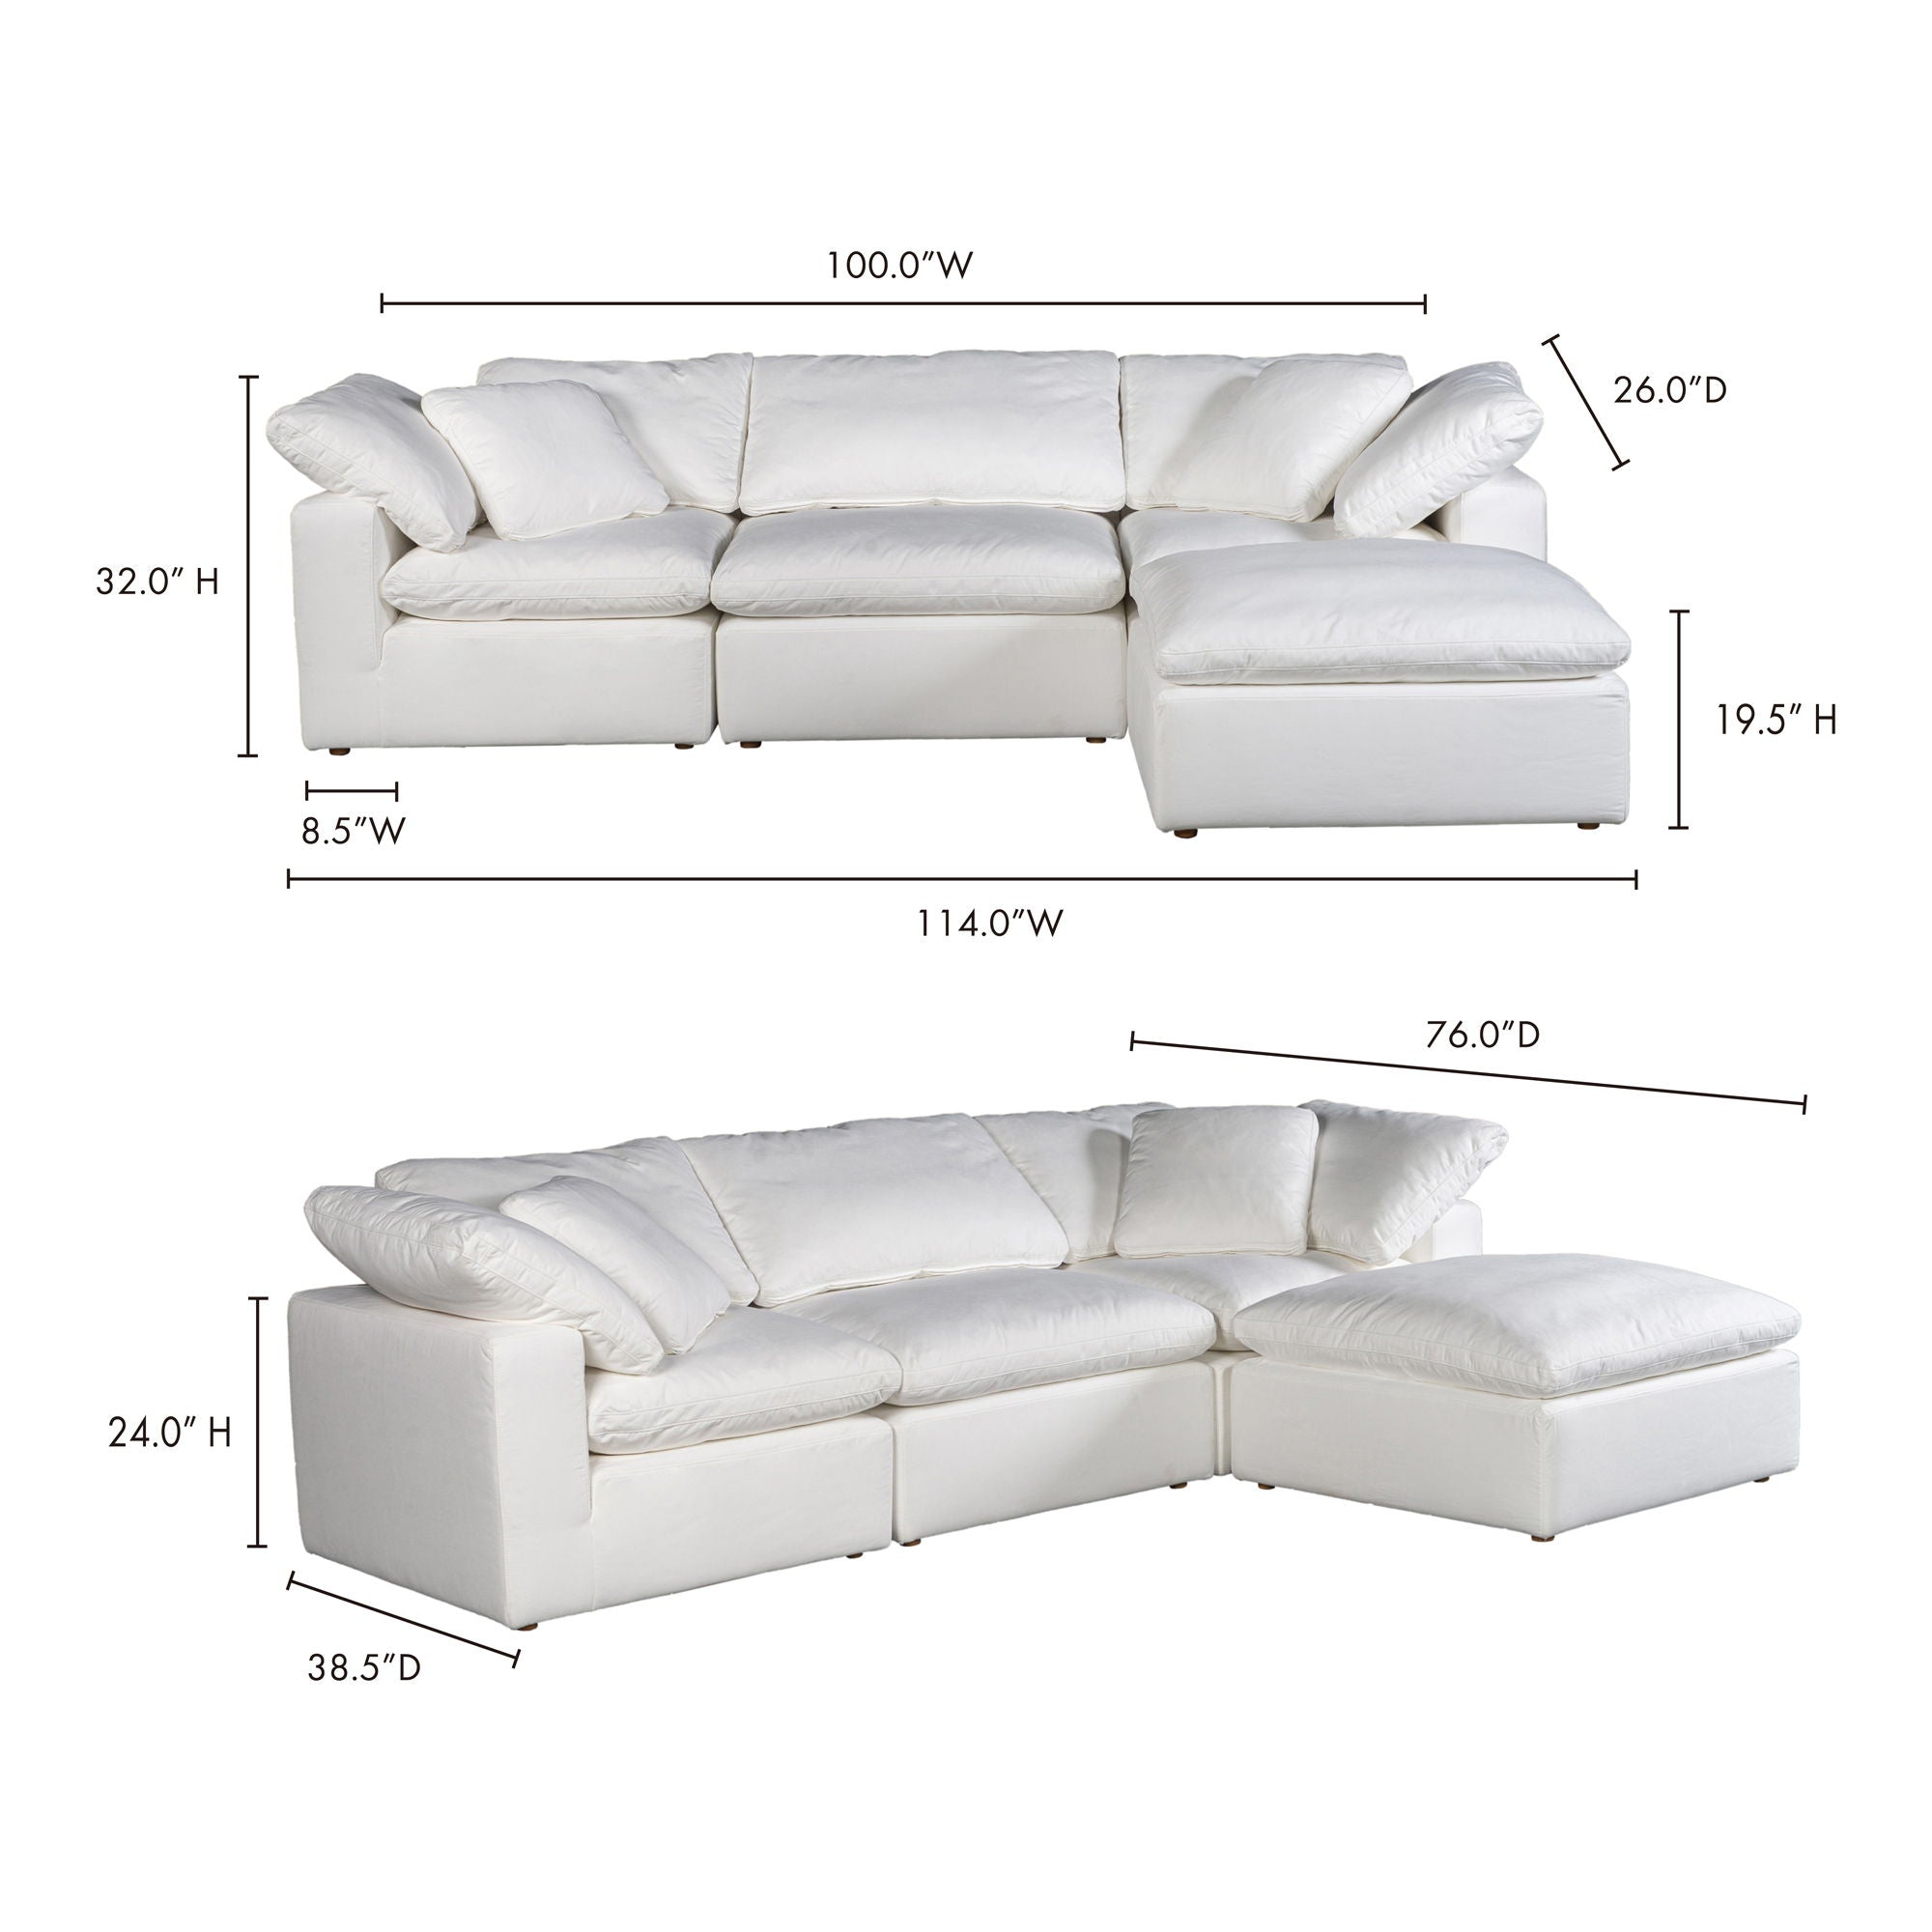 Terra Condo Lounge Modular Sectional - LiveSmart Fabric - Cream White - Comfortable and Stylish Living Room Furniture-Stationary Sectionals-American Furniture Outlet